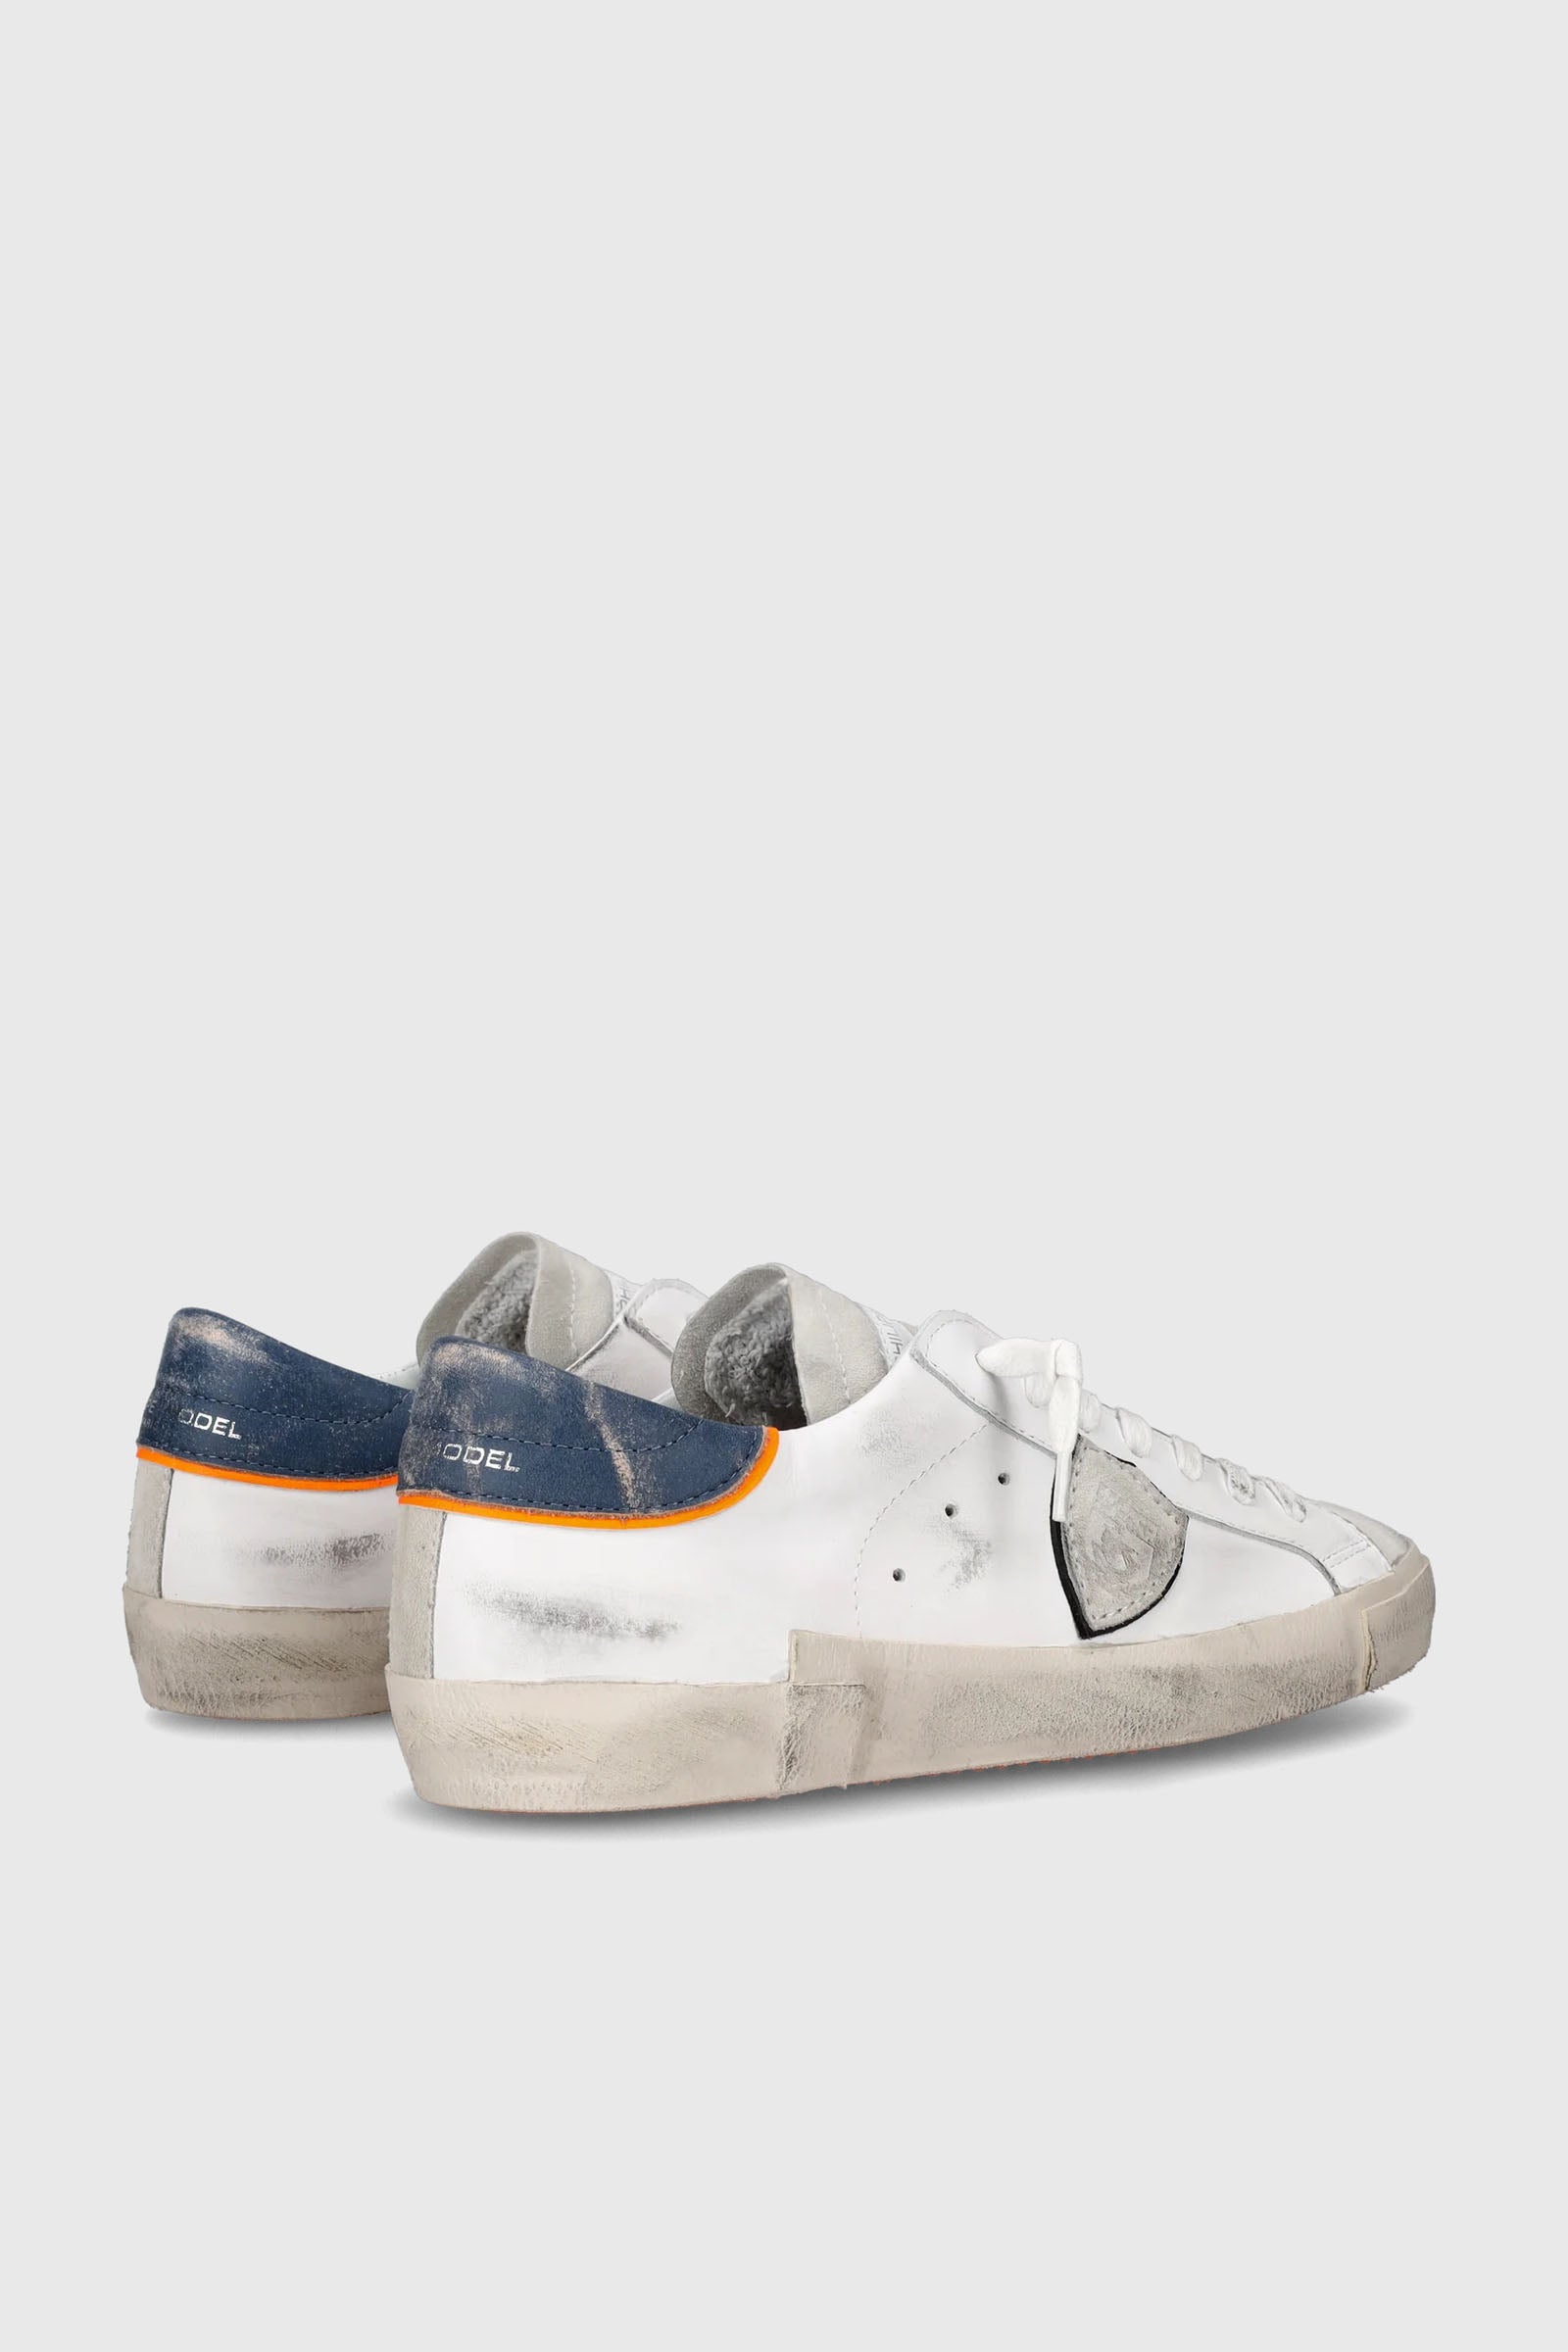 Philippe Model PRSX Vintage Veal Leather Sneakers White/Blue - 3